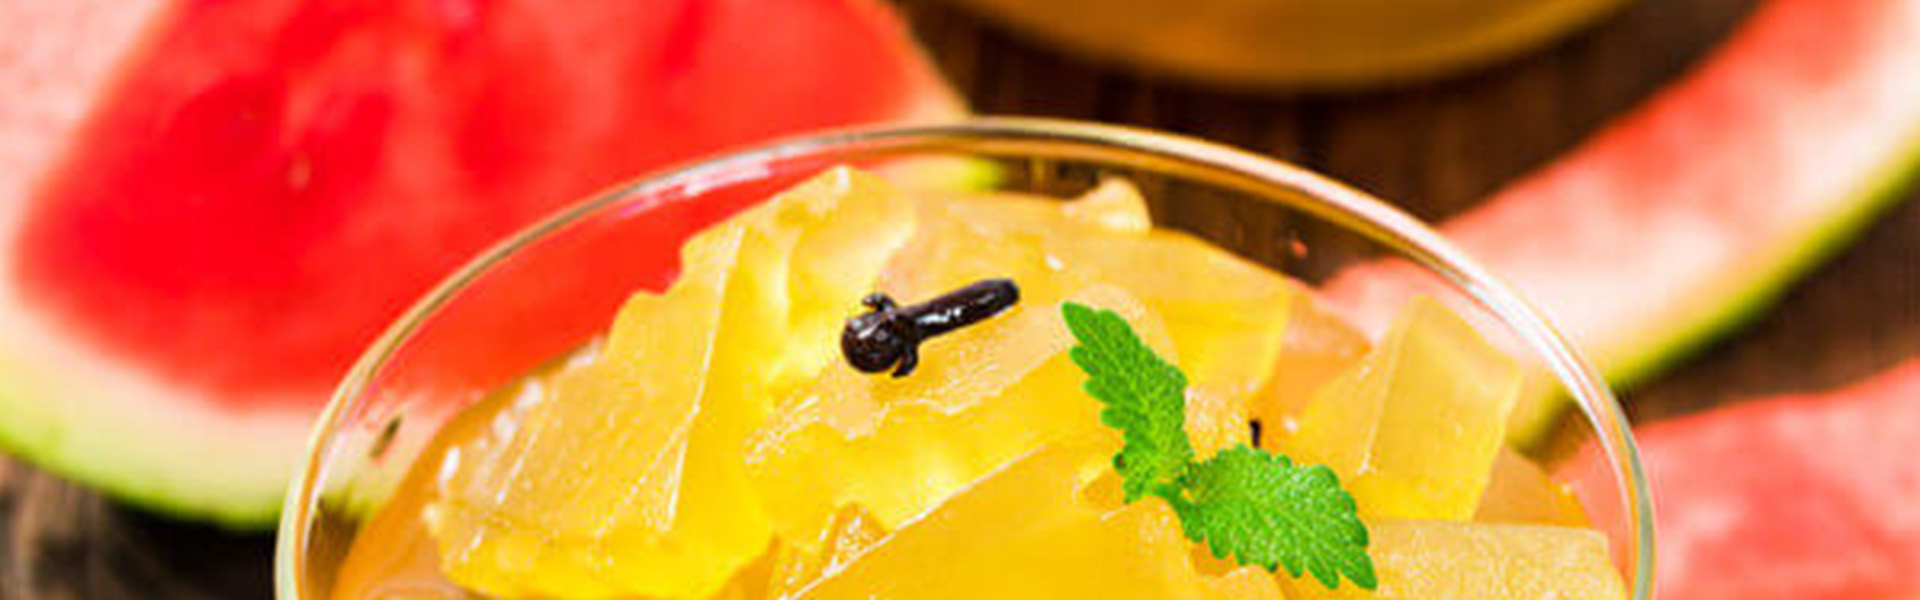 Candied Melon Rind